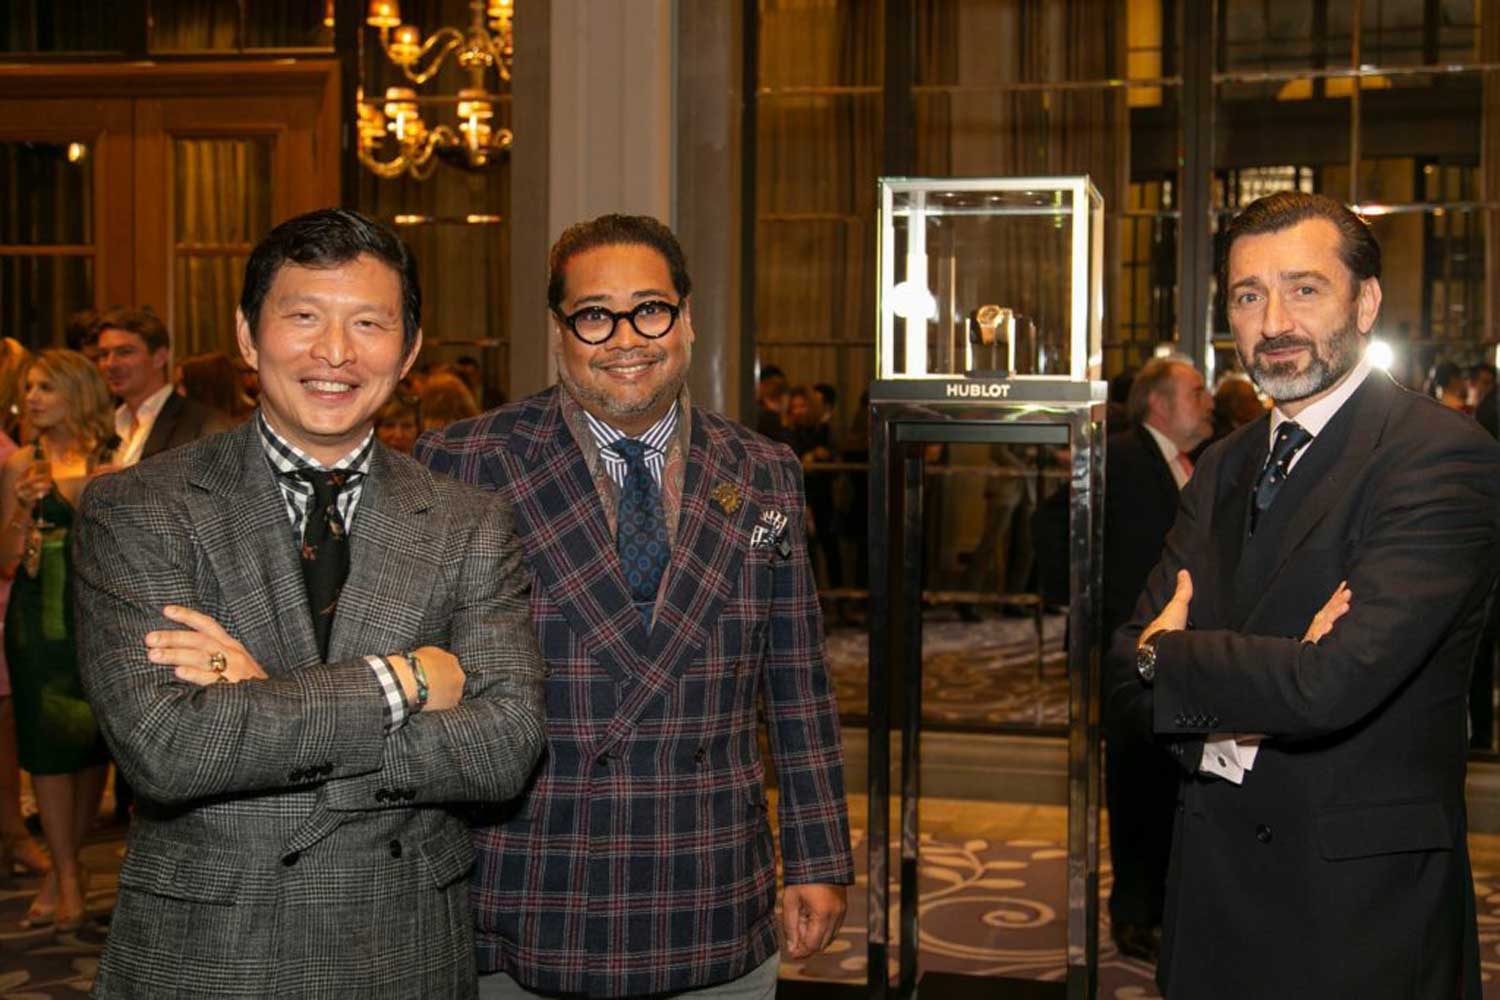 The watch was launched in 2018 with an event at the Corinthia Hotel in London. Seen here with Wei is noted watch collector Ahmed “Shary” Rahman